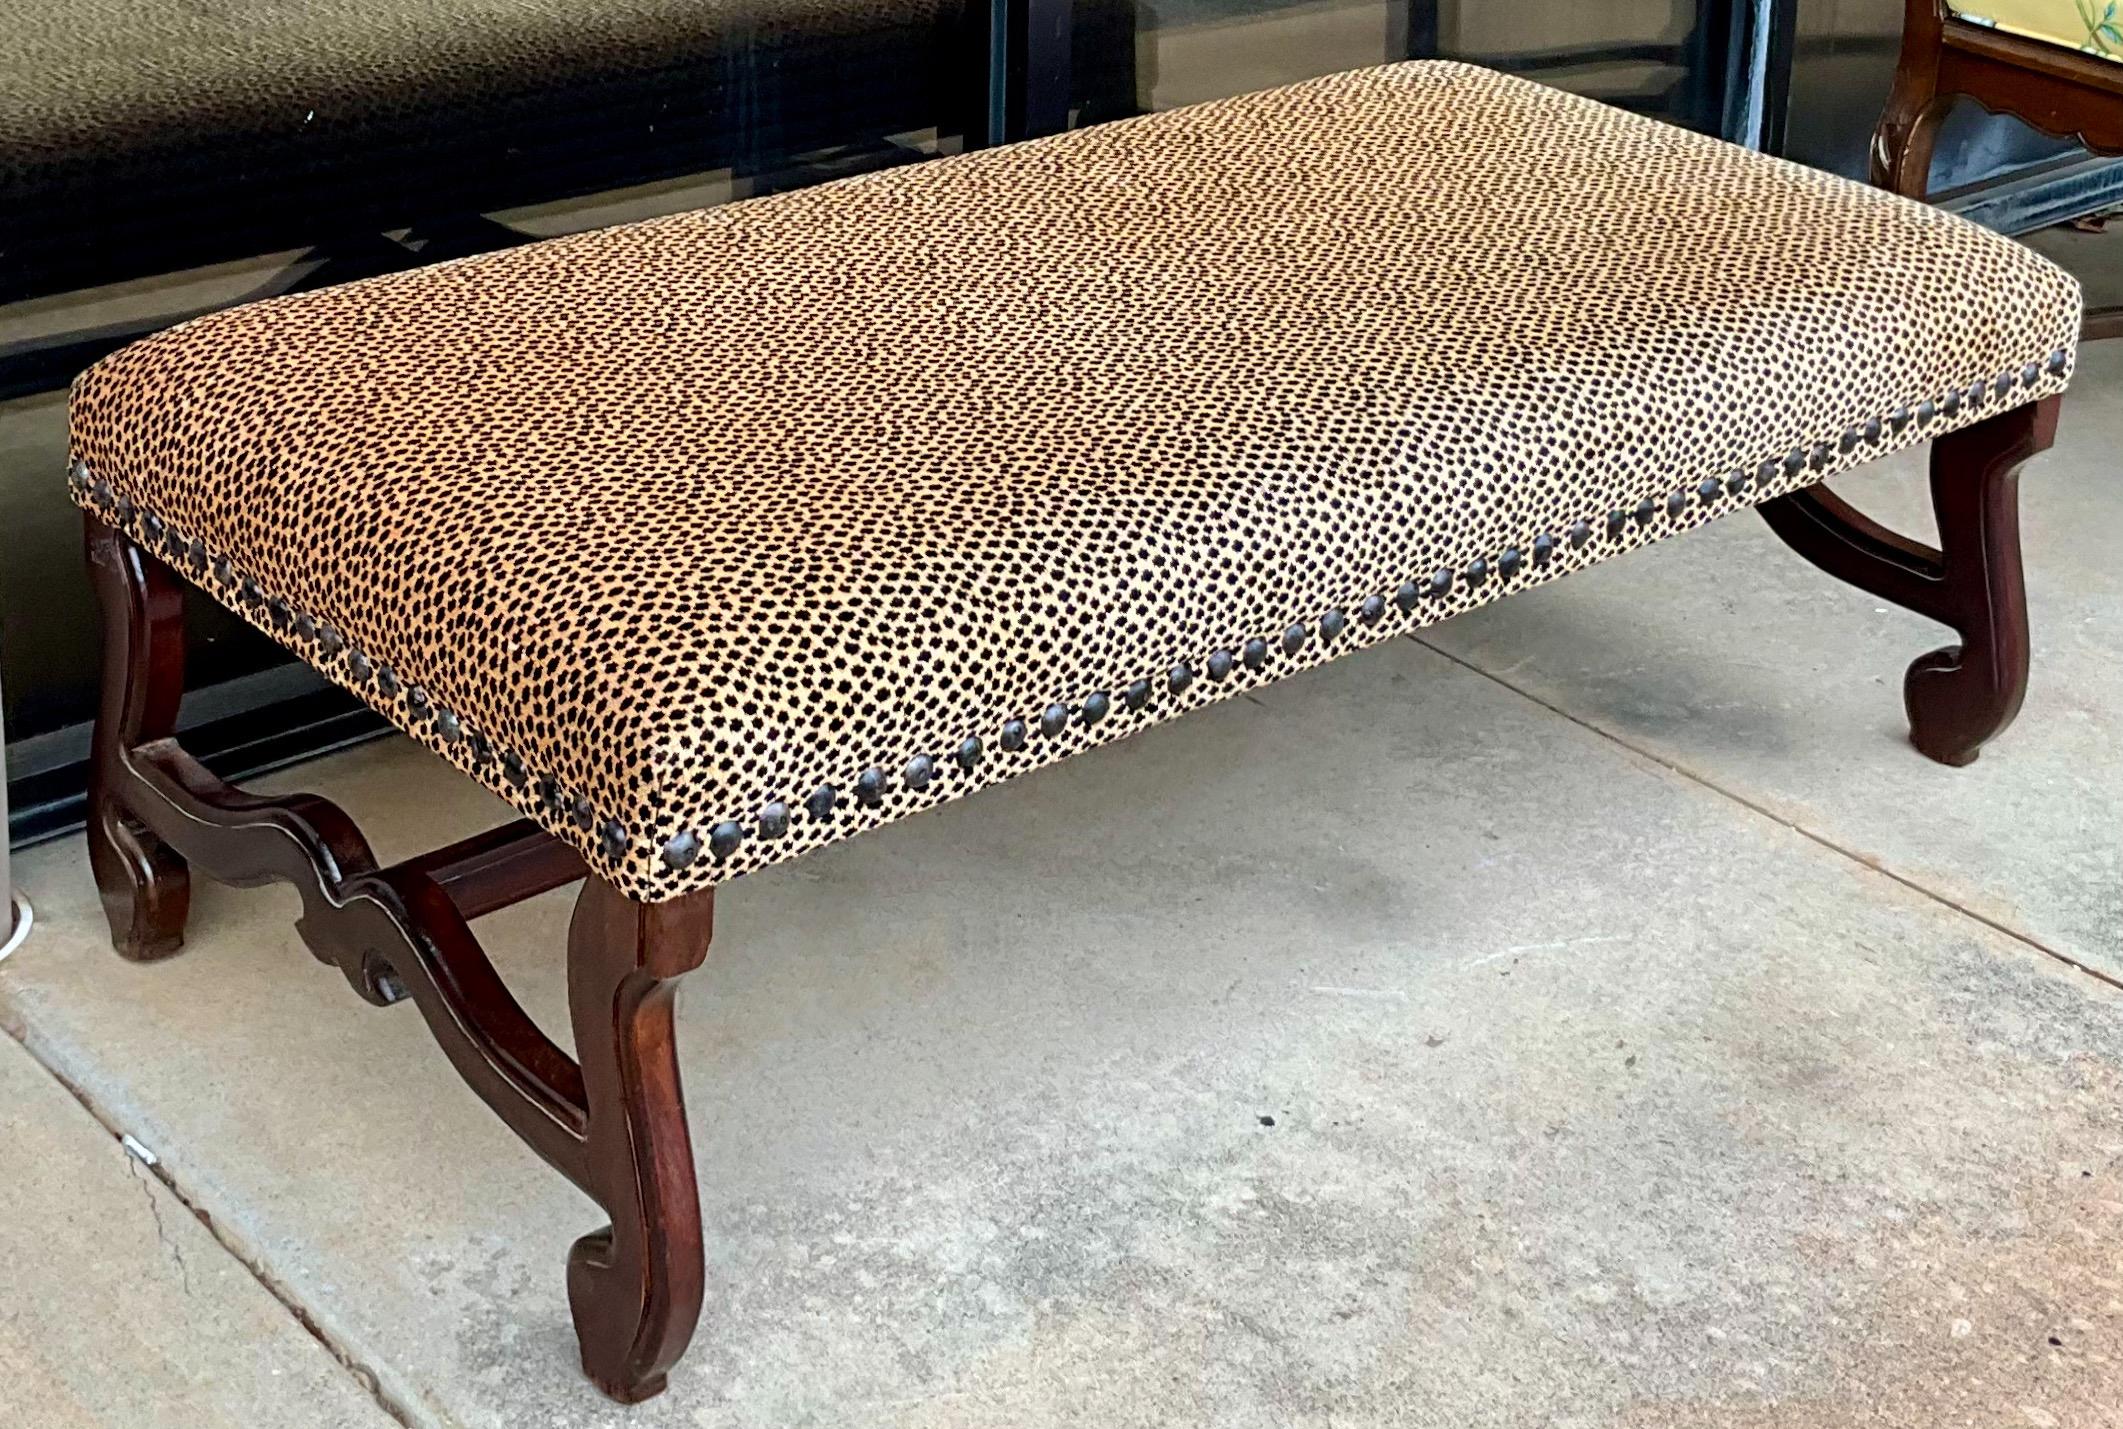 American French Style Carved Oak Ottoman W/ Nailheads In Leopard Upholstery For Sale